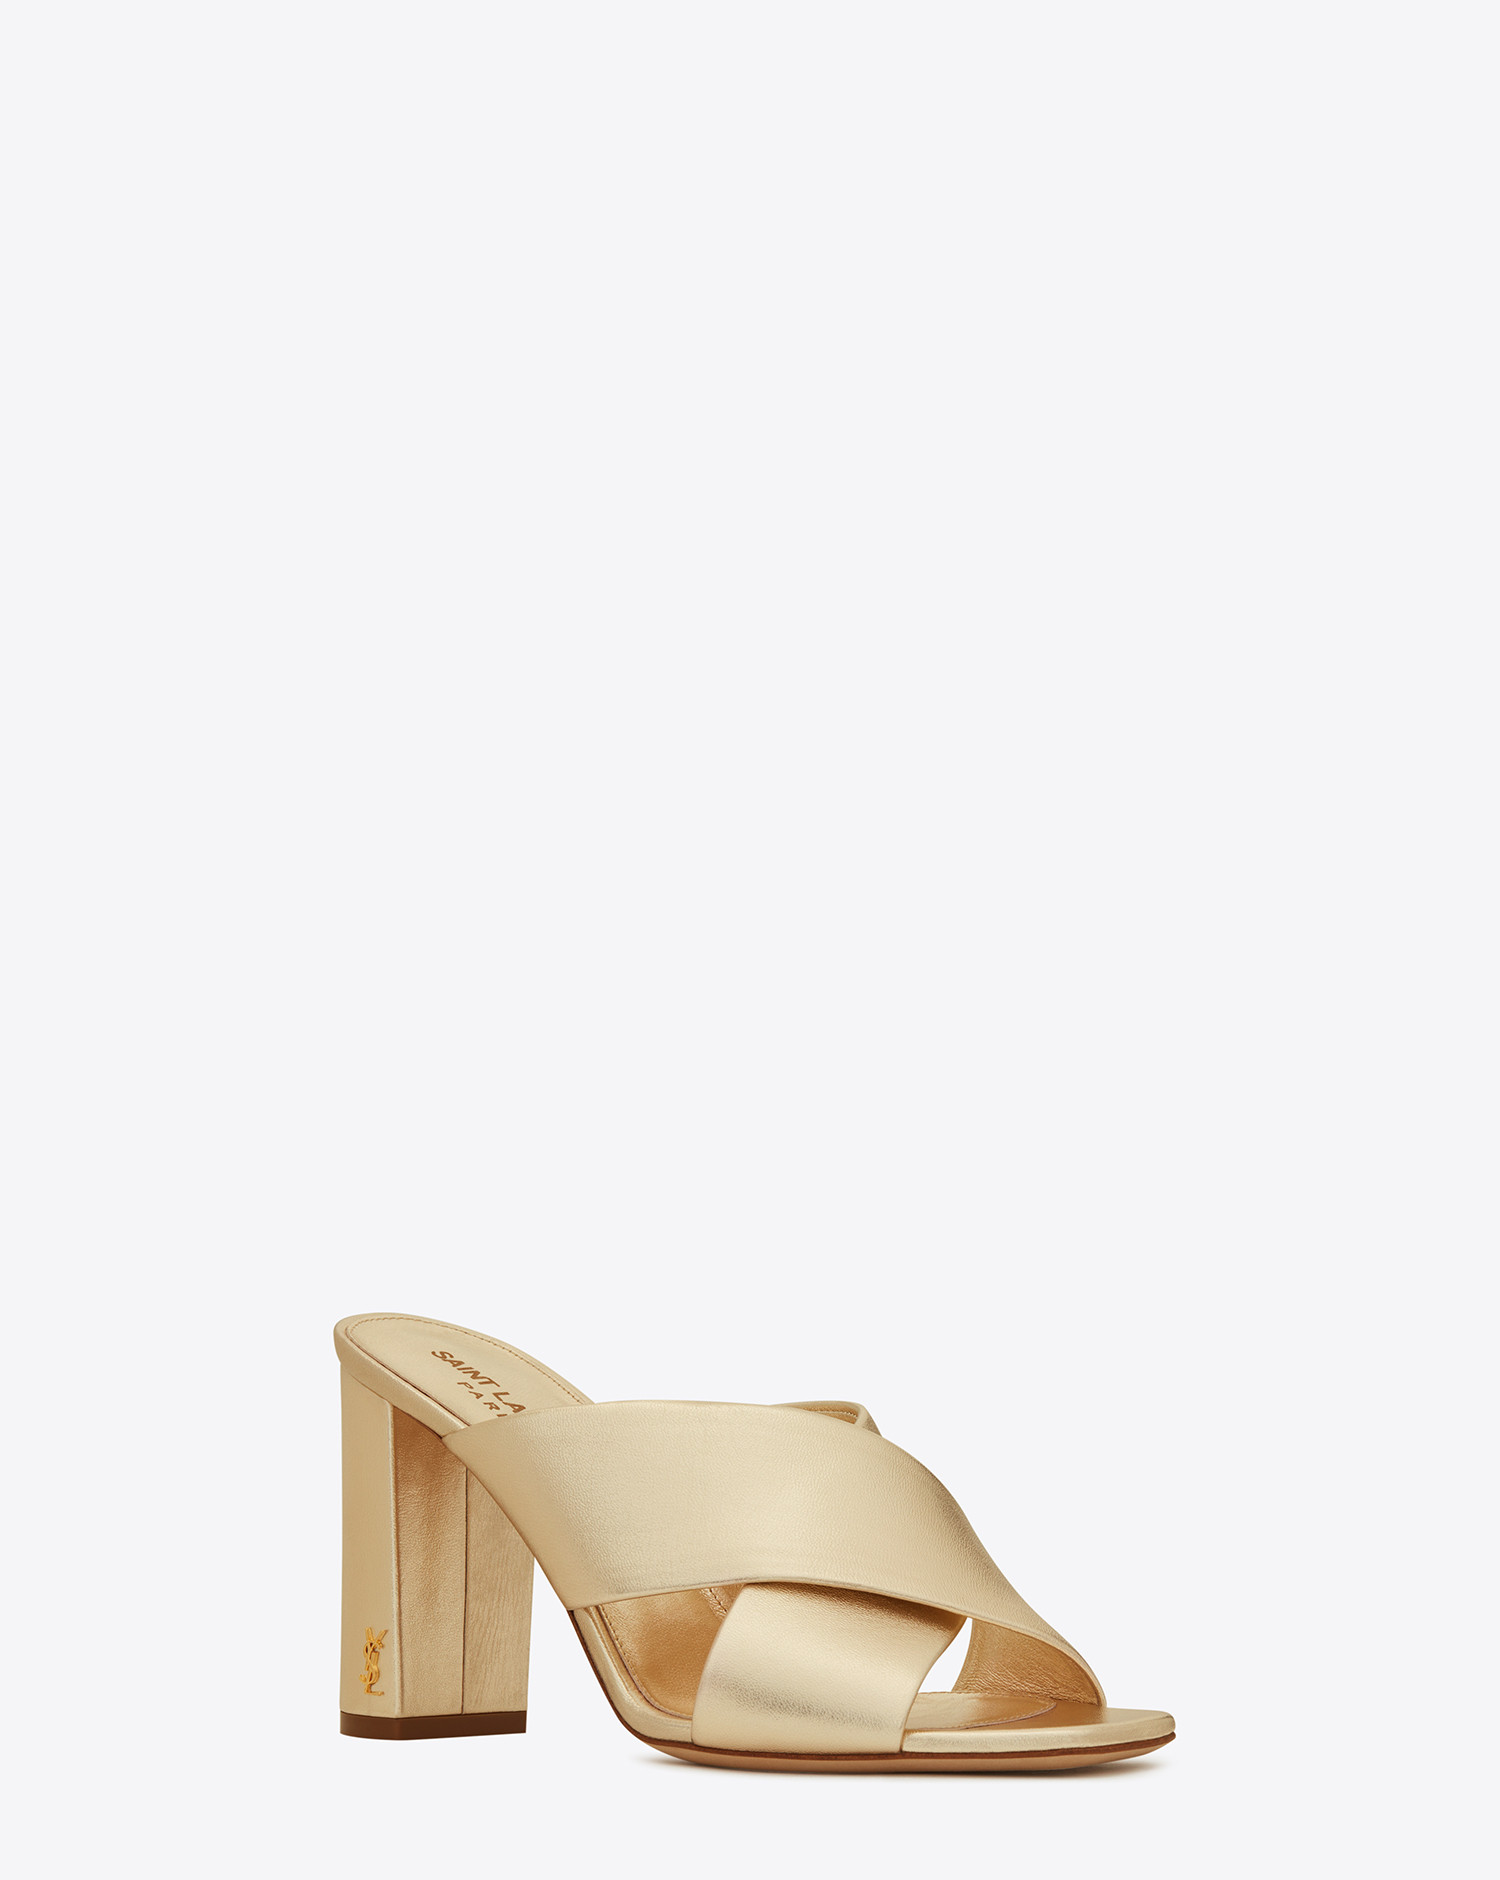 YSL - LOULOU 95 MULE SANDAL IN PALE GOLD | Mule sandals, Mules, Leather